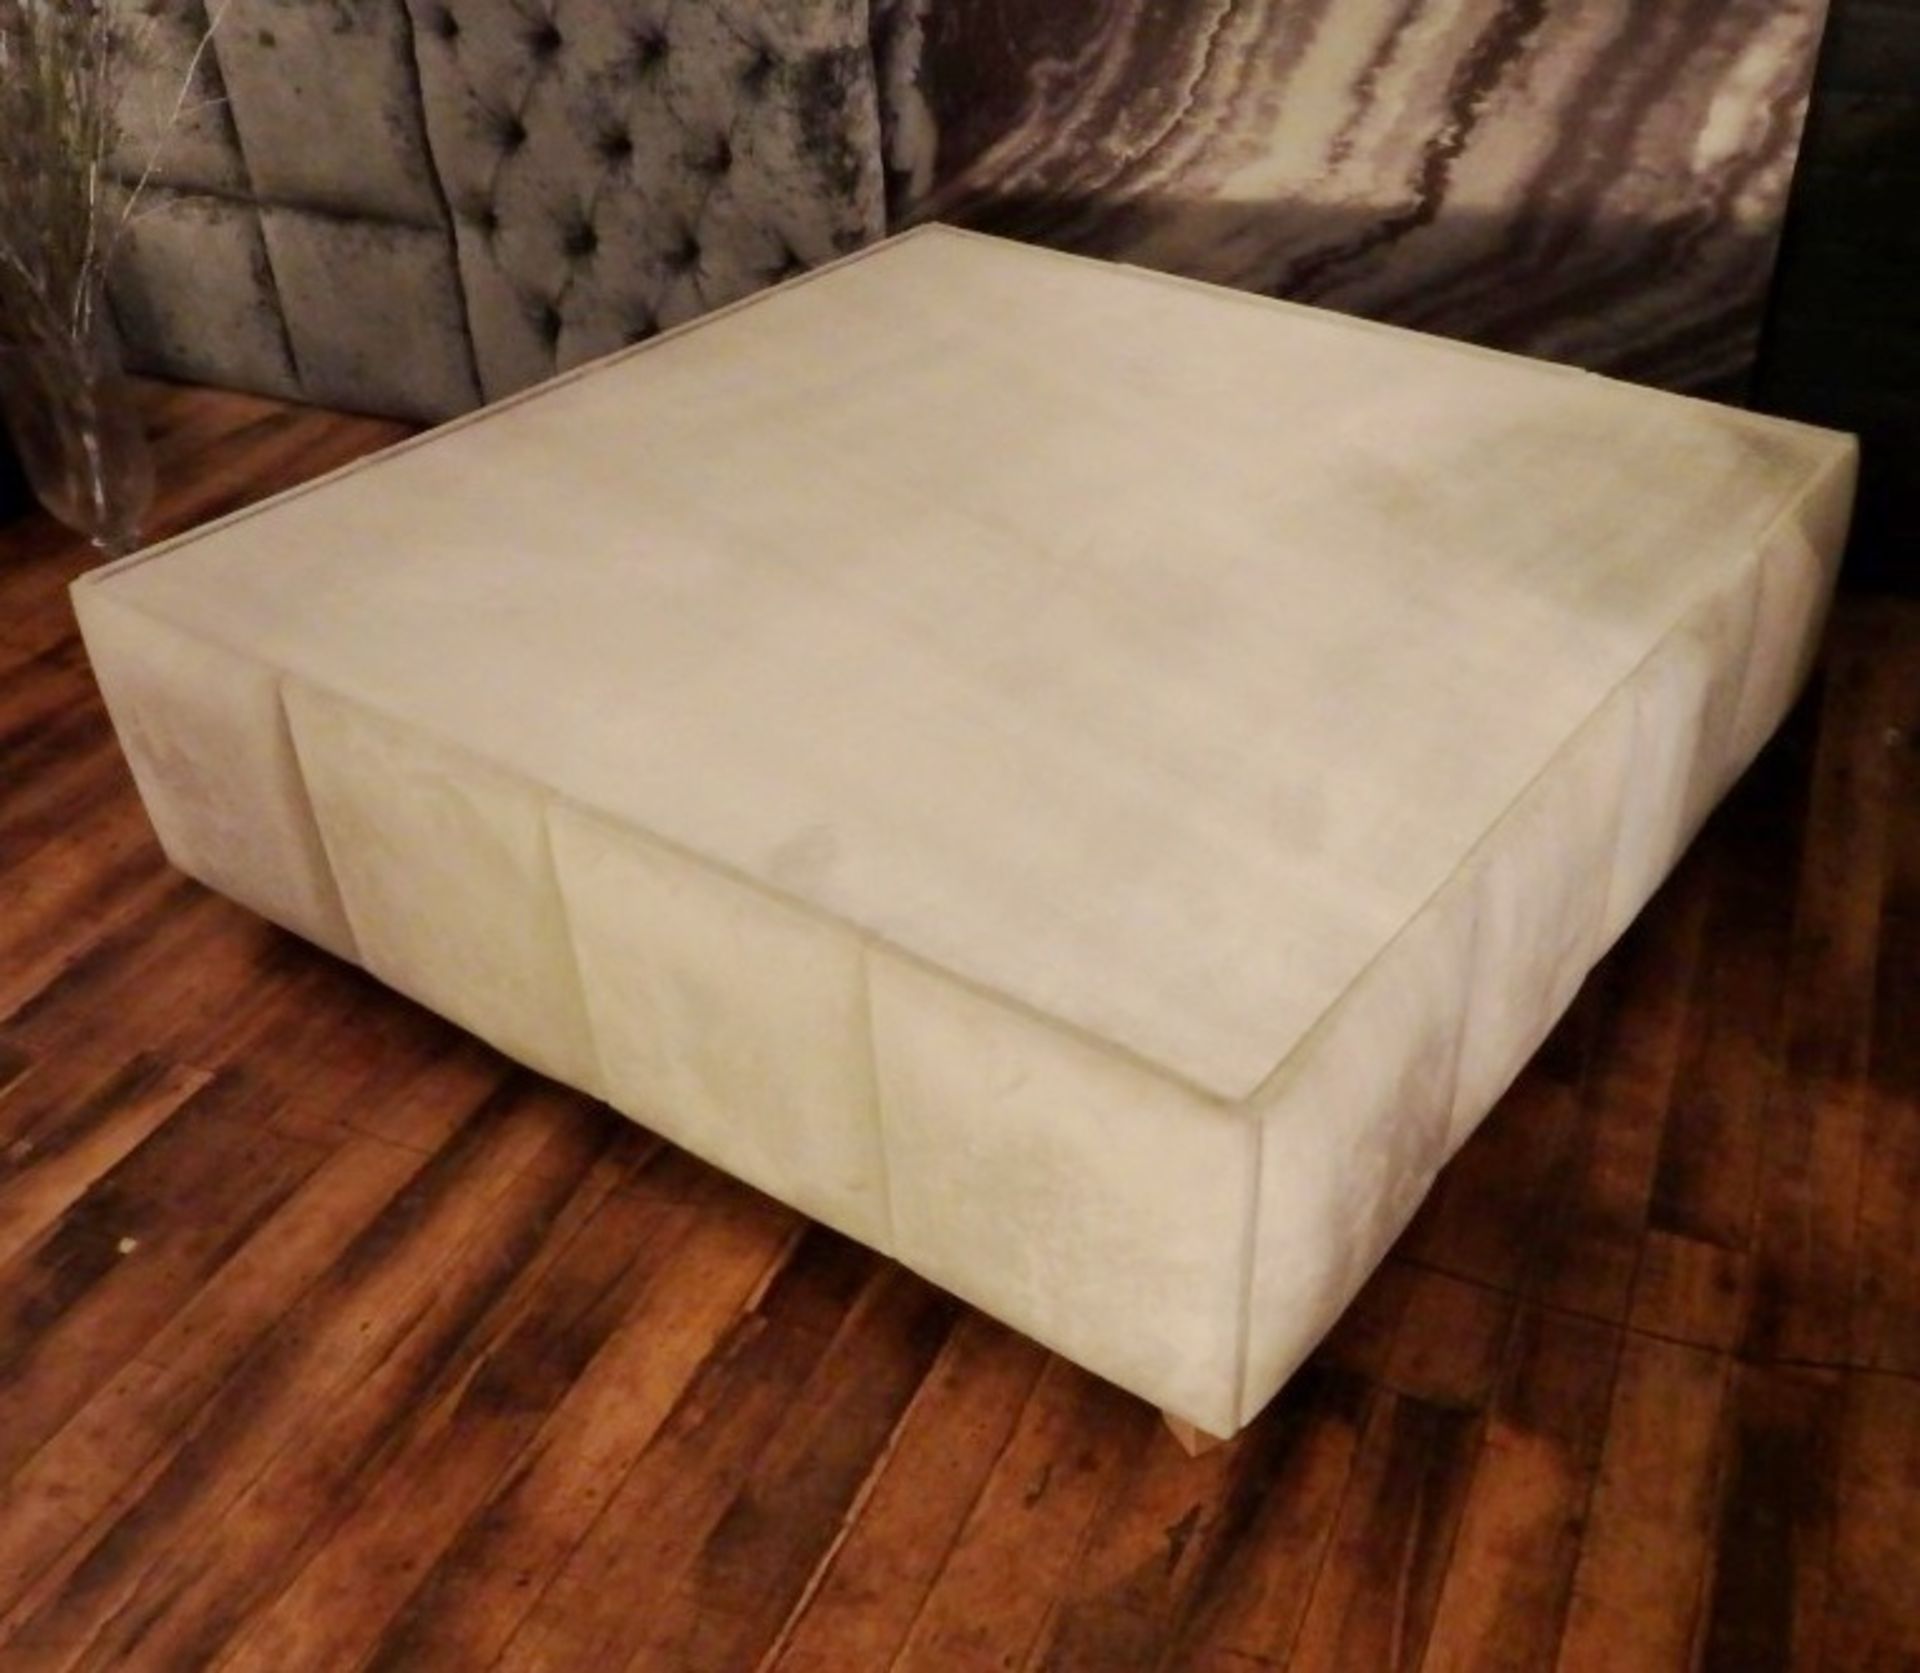 1 x Extra Large Square Hand-crafted Pouffe In A Cream Velvet Fabric - Dimensions: W124 x H39 x